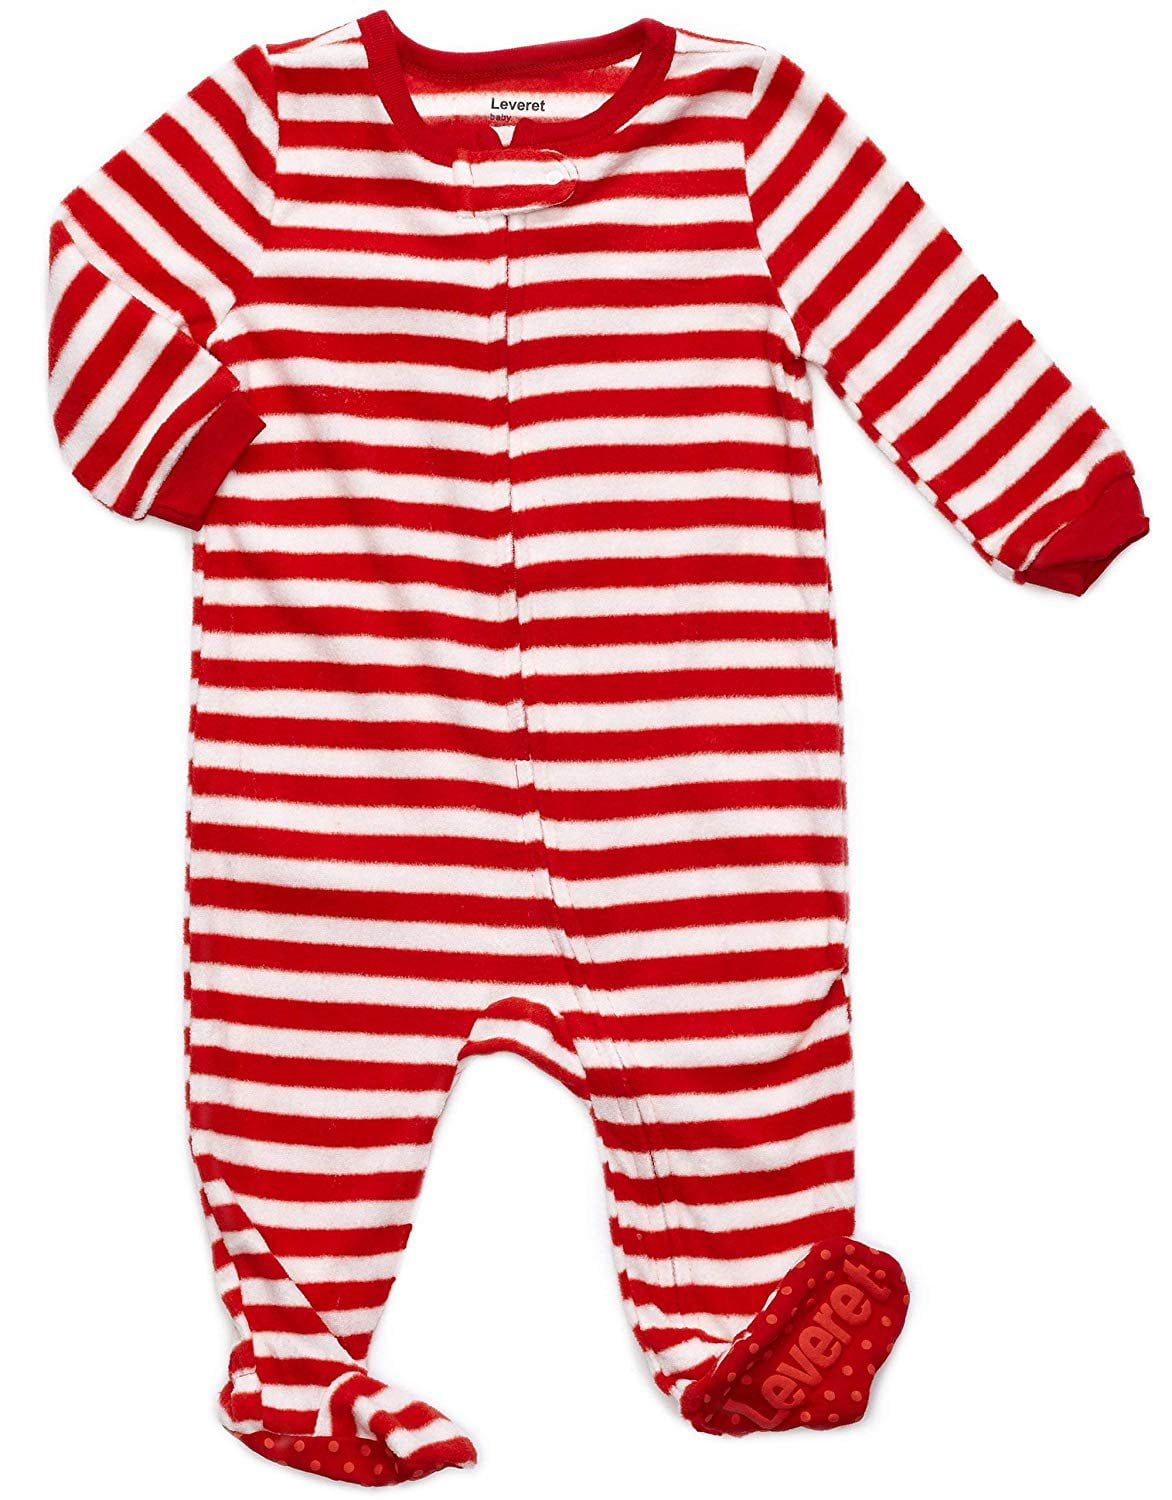 Leveret Infant Boy's Girl's Christmas Red White Striped Footed Pajamas Sleeper 